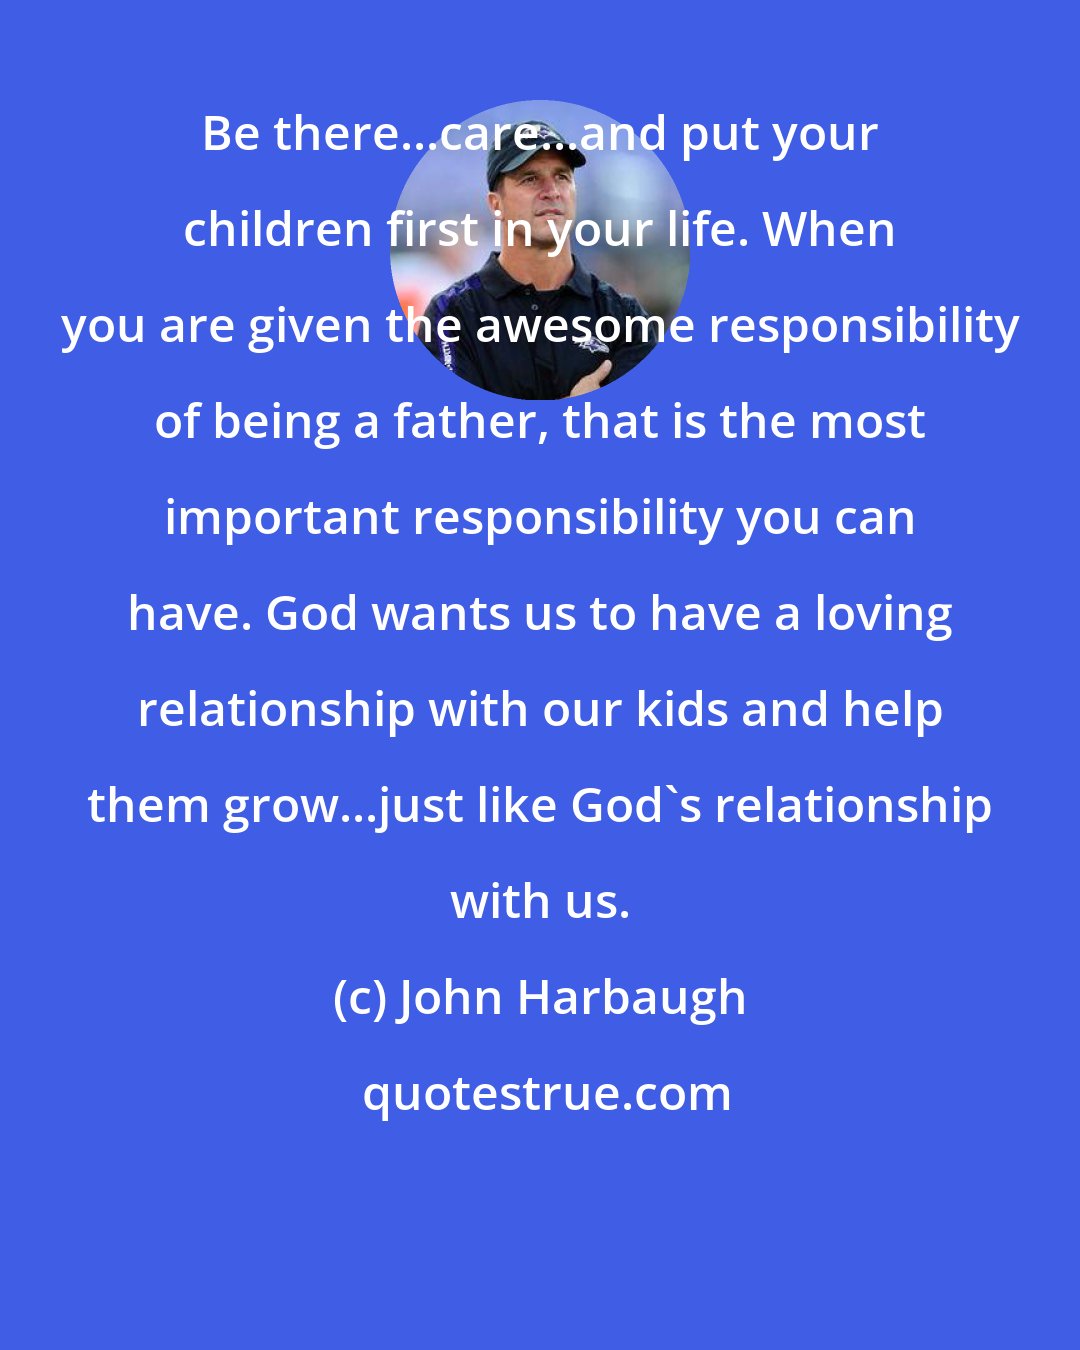 John Harbaugh: Be there...care...and put your children first in your life. When you are given the awesome responsibility of being a father, that is the most important responsibility you can have. God wants us to have a loving relationship with our kids and help them grow...just like God's relationship with us.